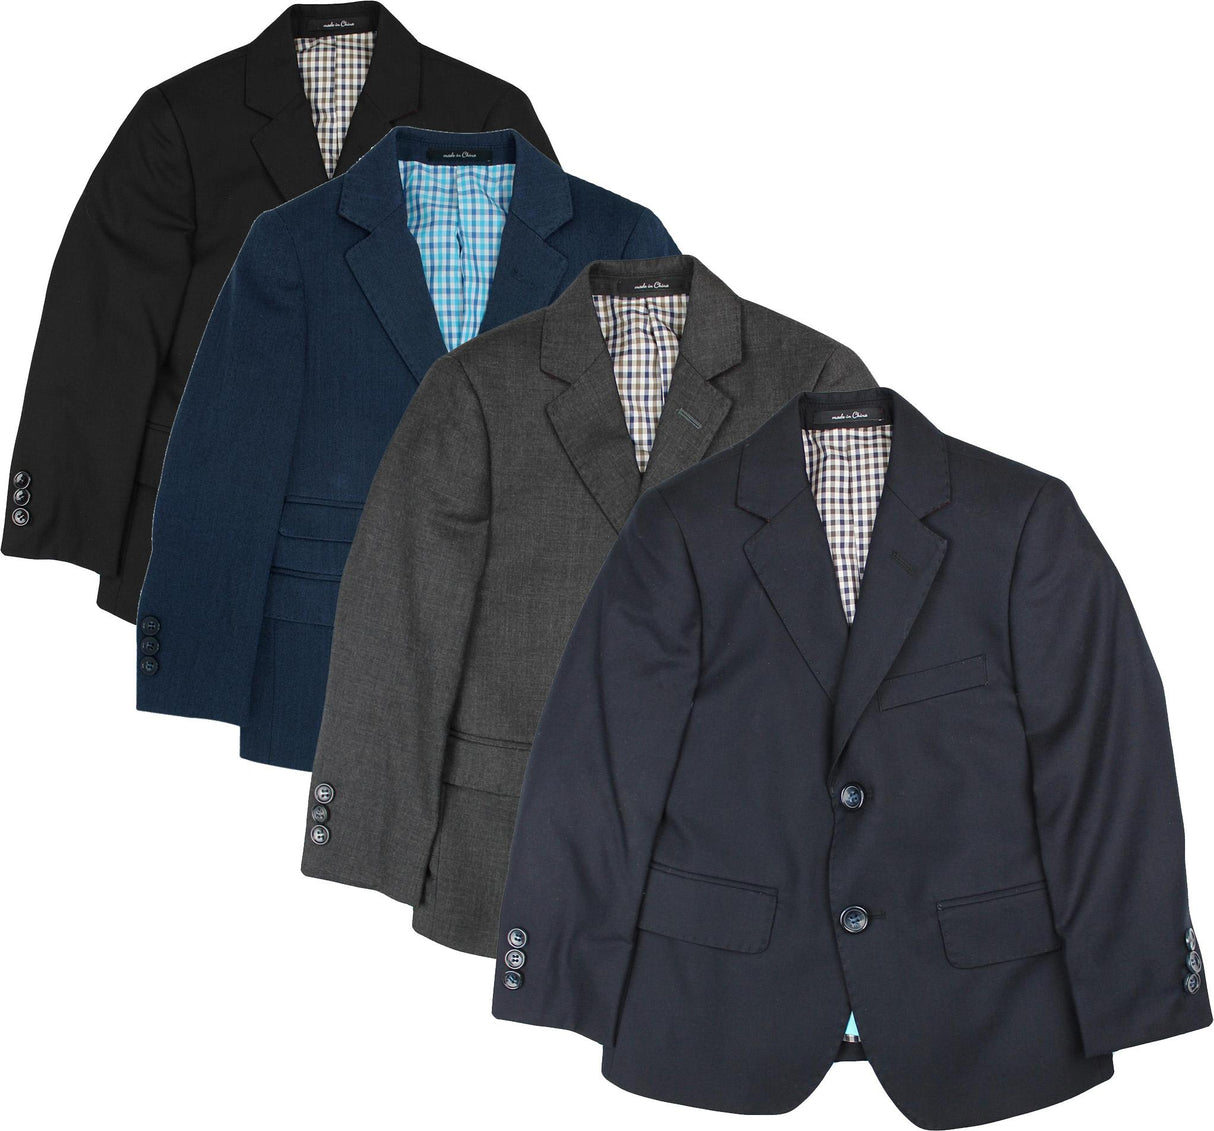 T.O. Collection Mens Blazer Suit Jacket